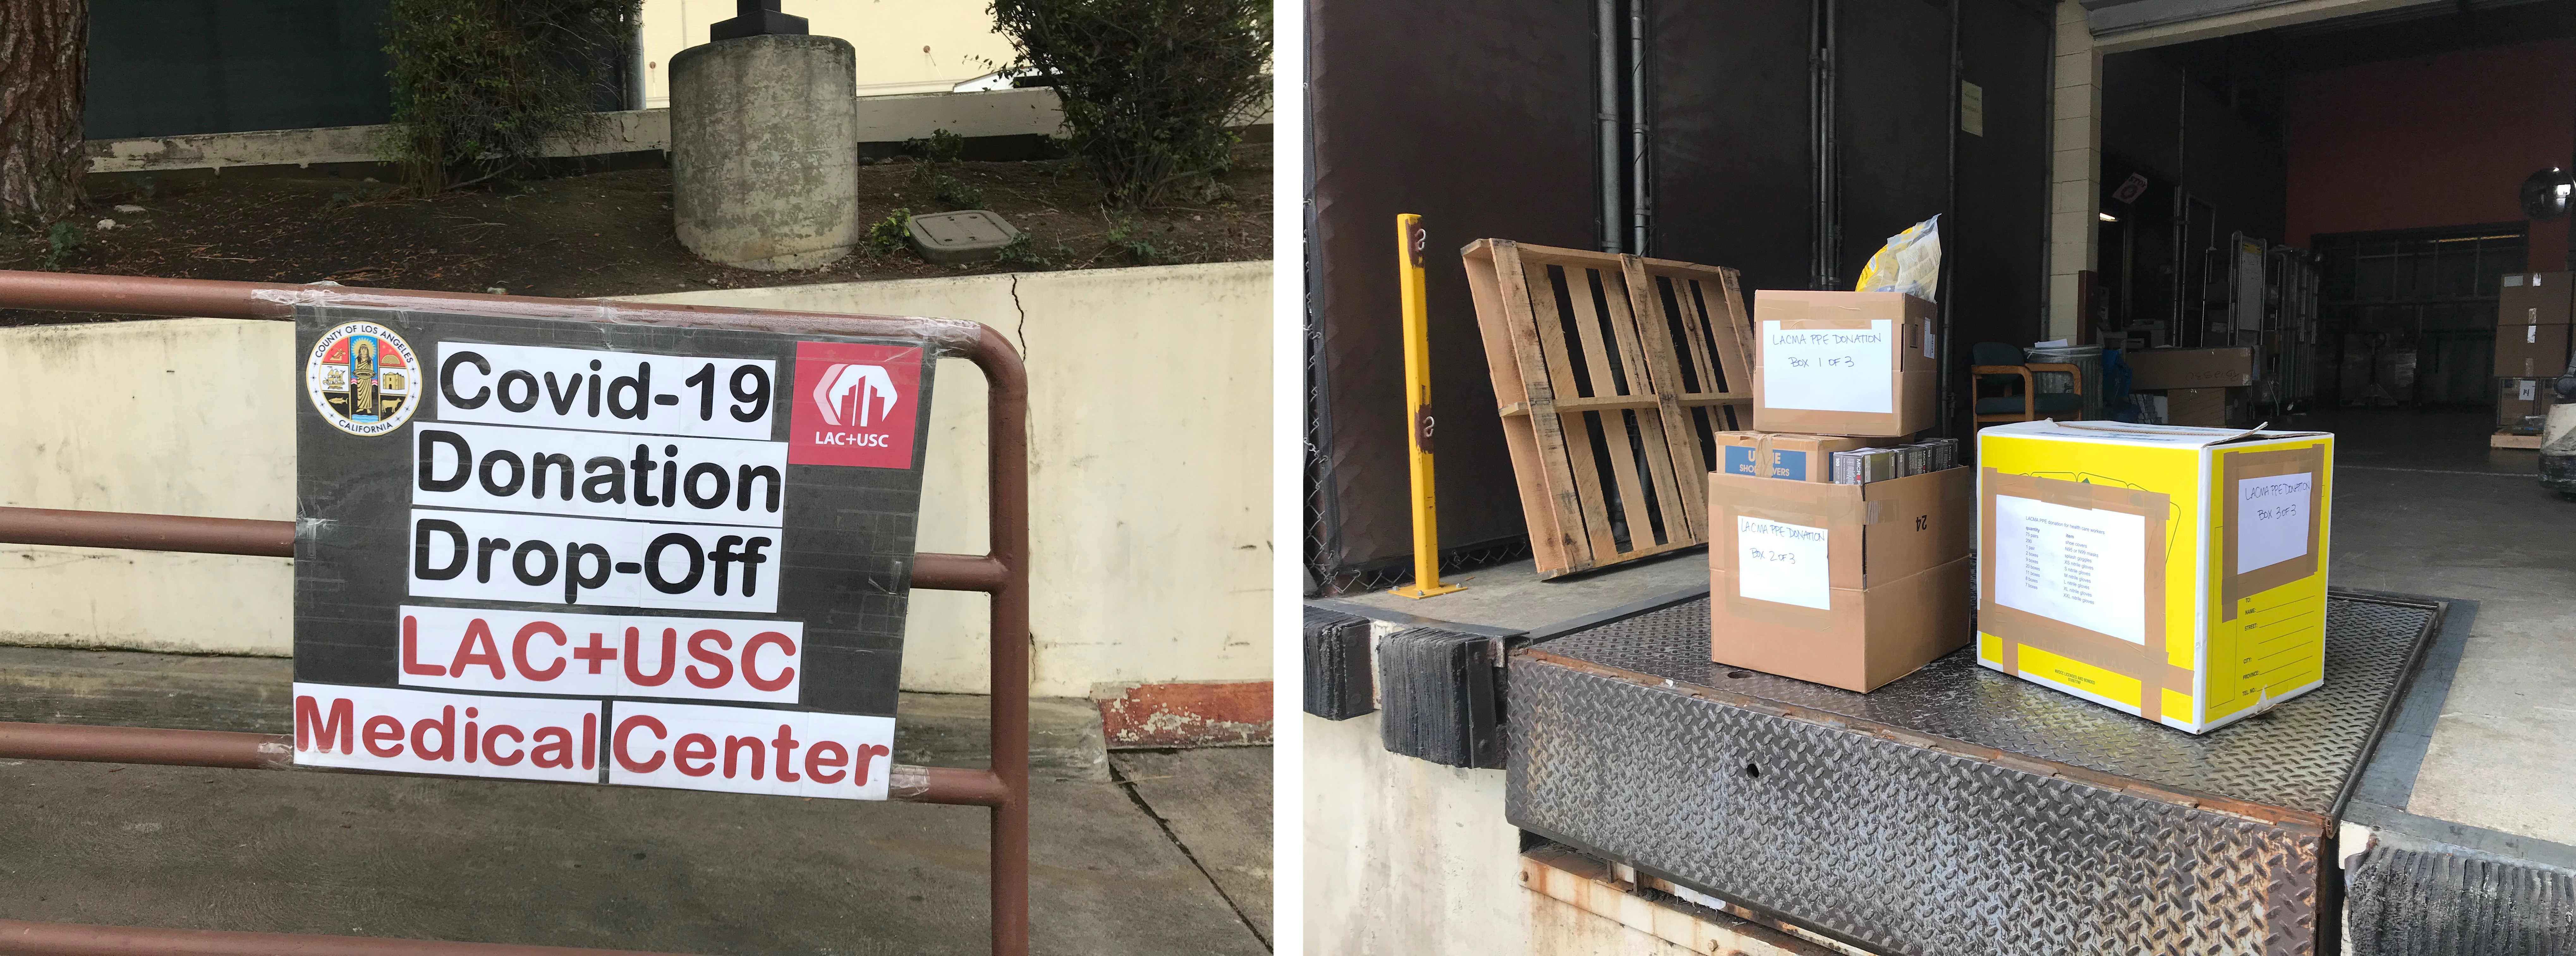 Left: Sign marking drop-off location. Right: Our donation received at the hospital loading dock.